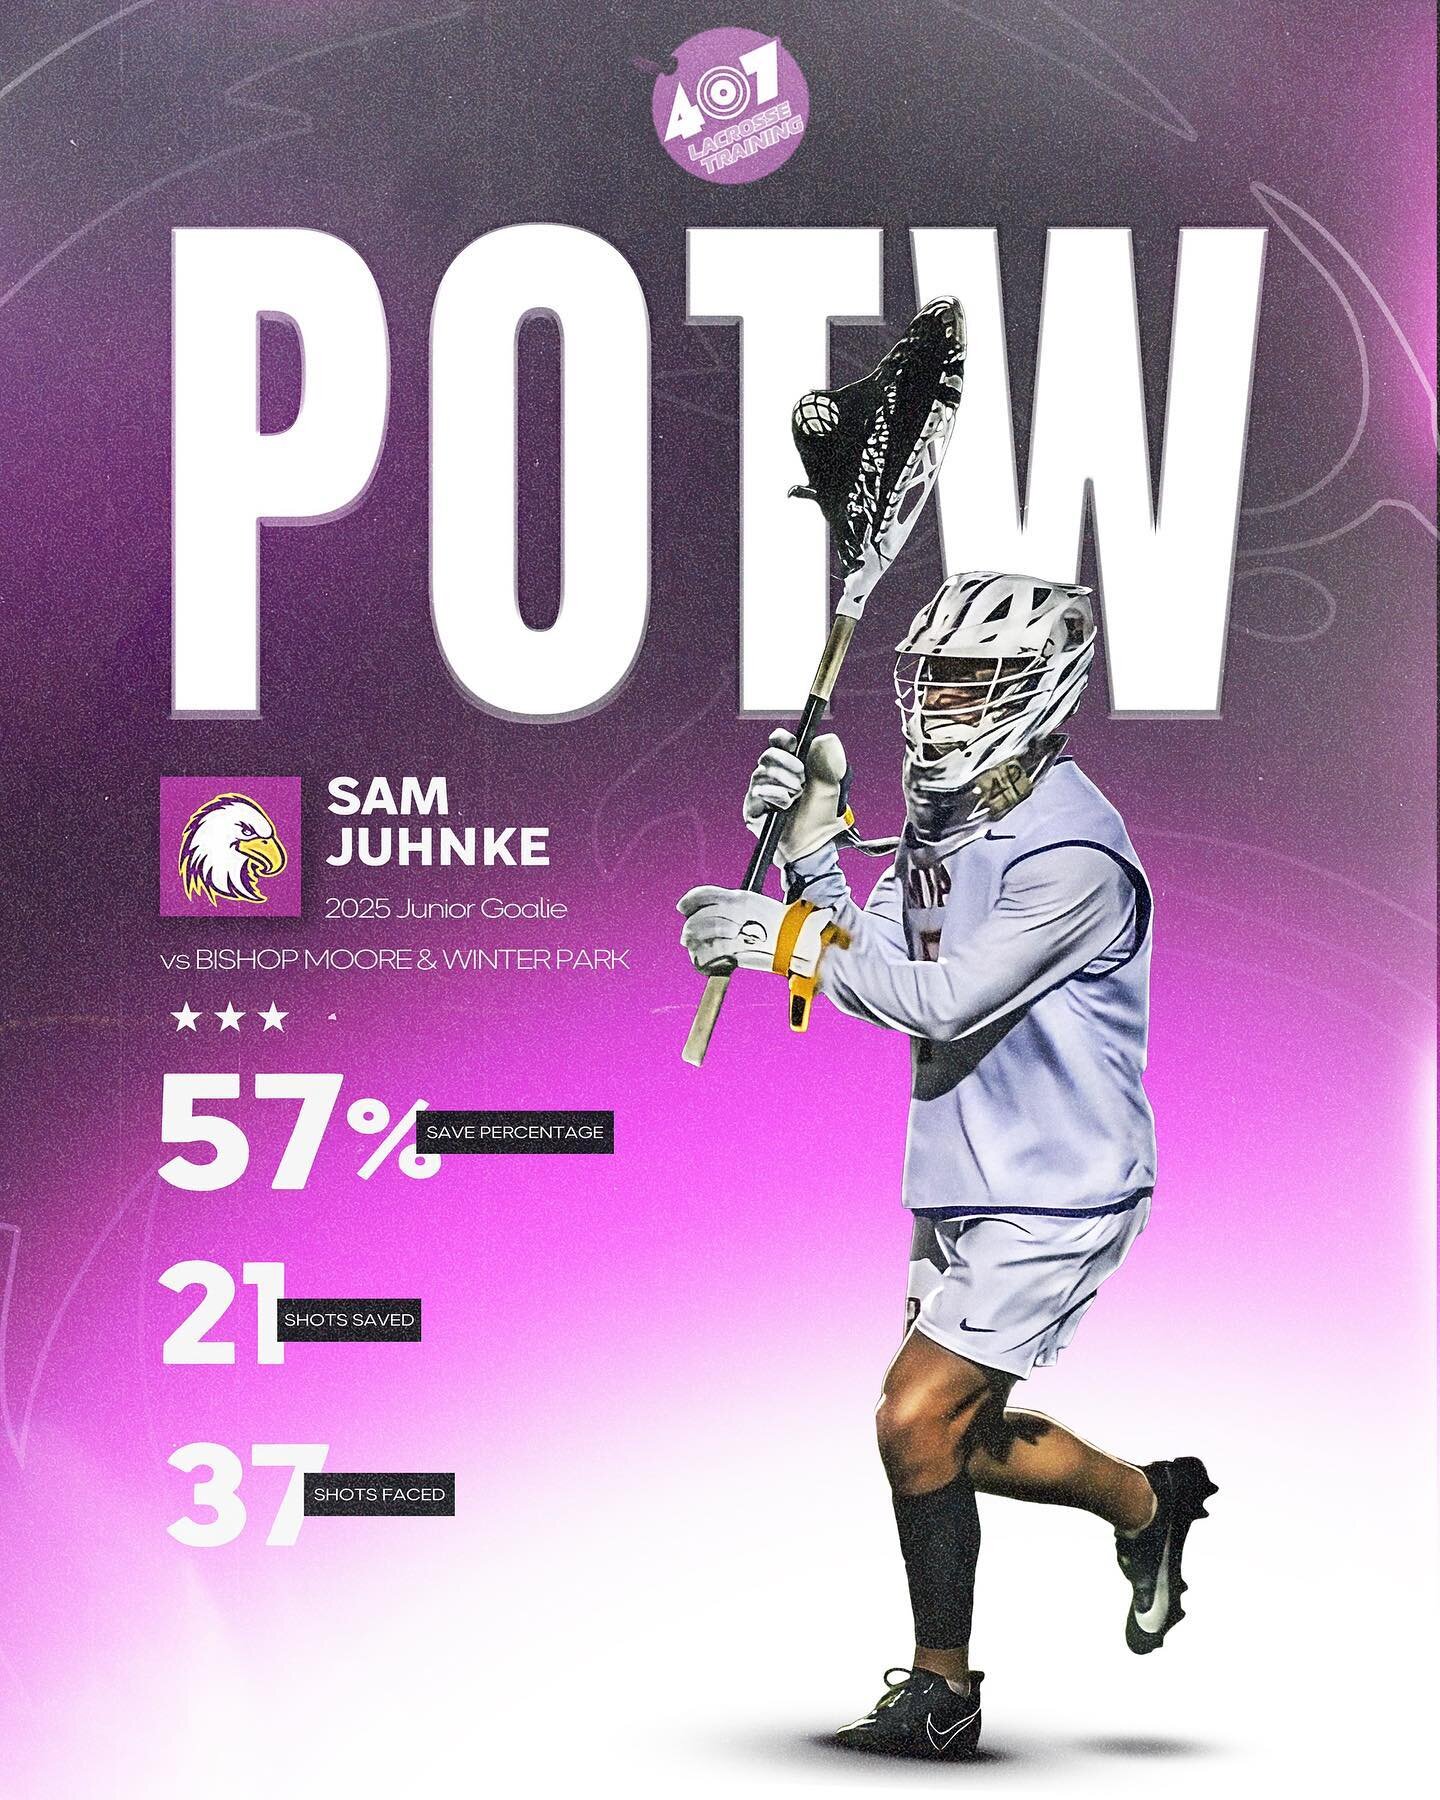 The Votes are in&hellip; Congratulations to @samjuhnkee on being the first 407 Lacrosse Player of The Week 🦅 🔥. Sam stood on his head against Bishop Moore and Winter Park, making 21 saves on 37 shots. The Apopka native is definitely someone to keep